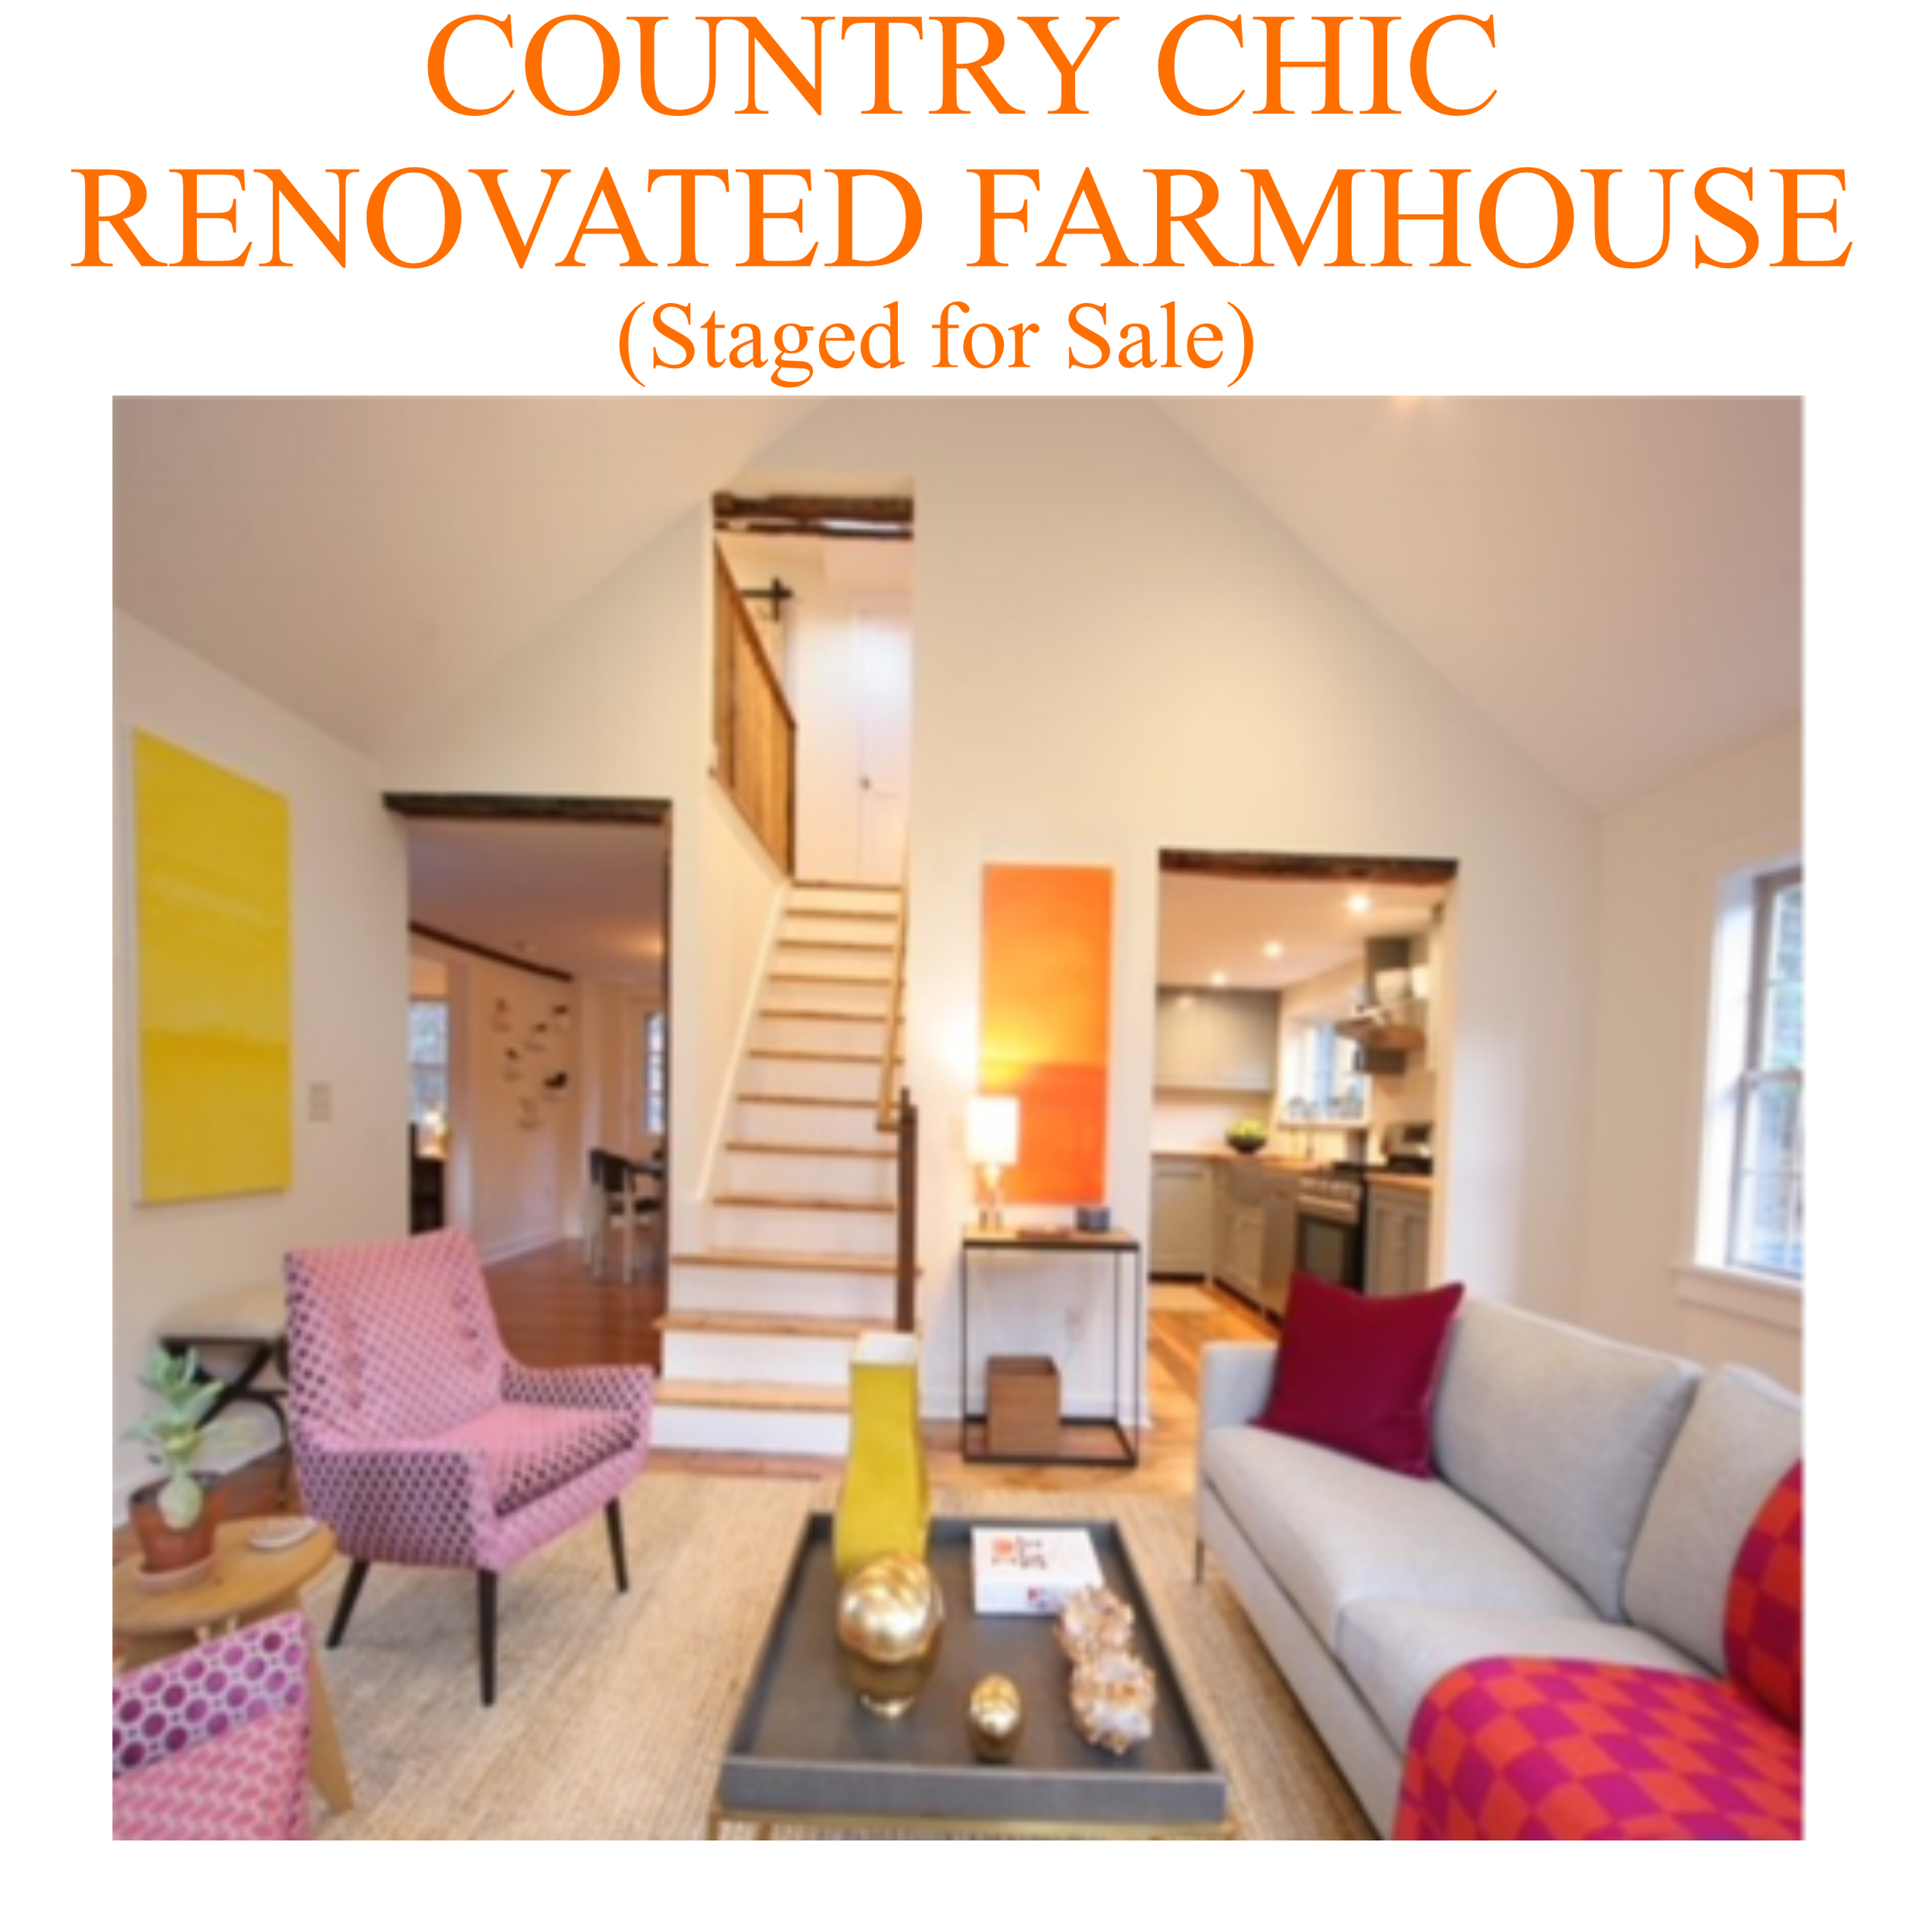 Country Chic Renovated Farmhouse.png